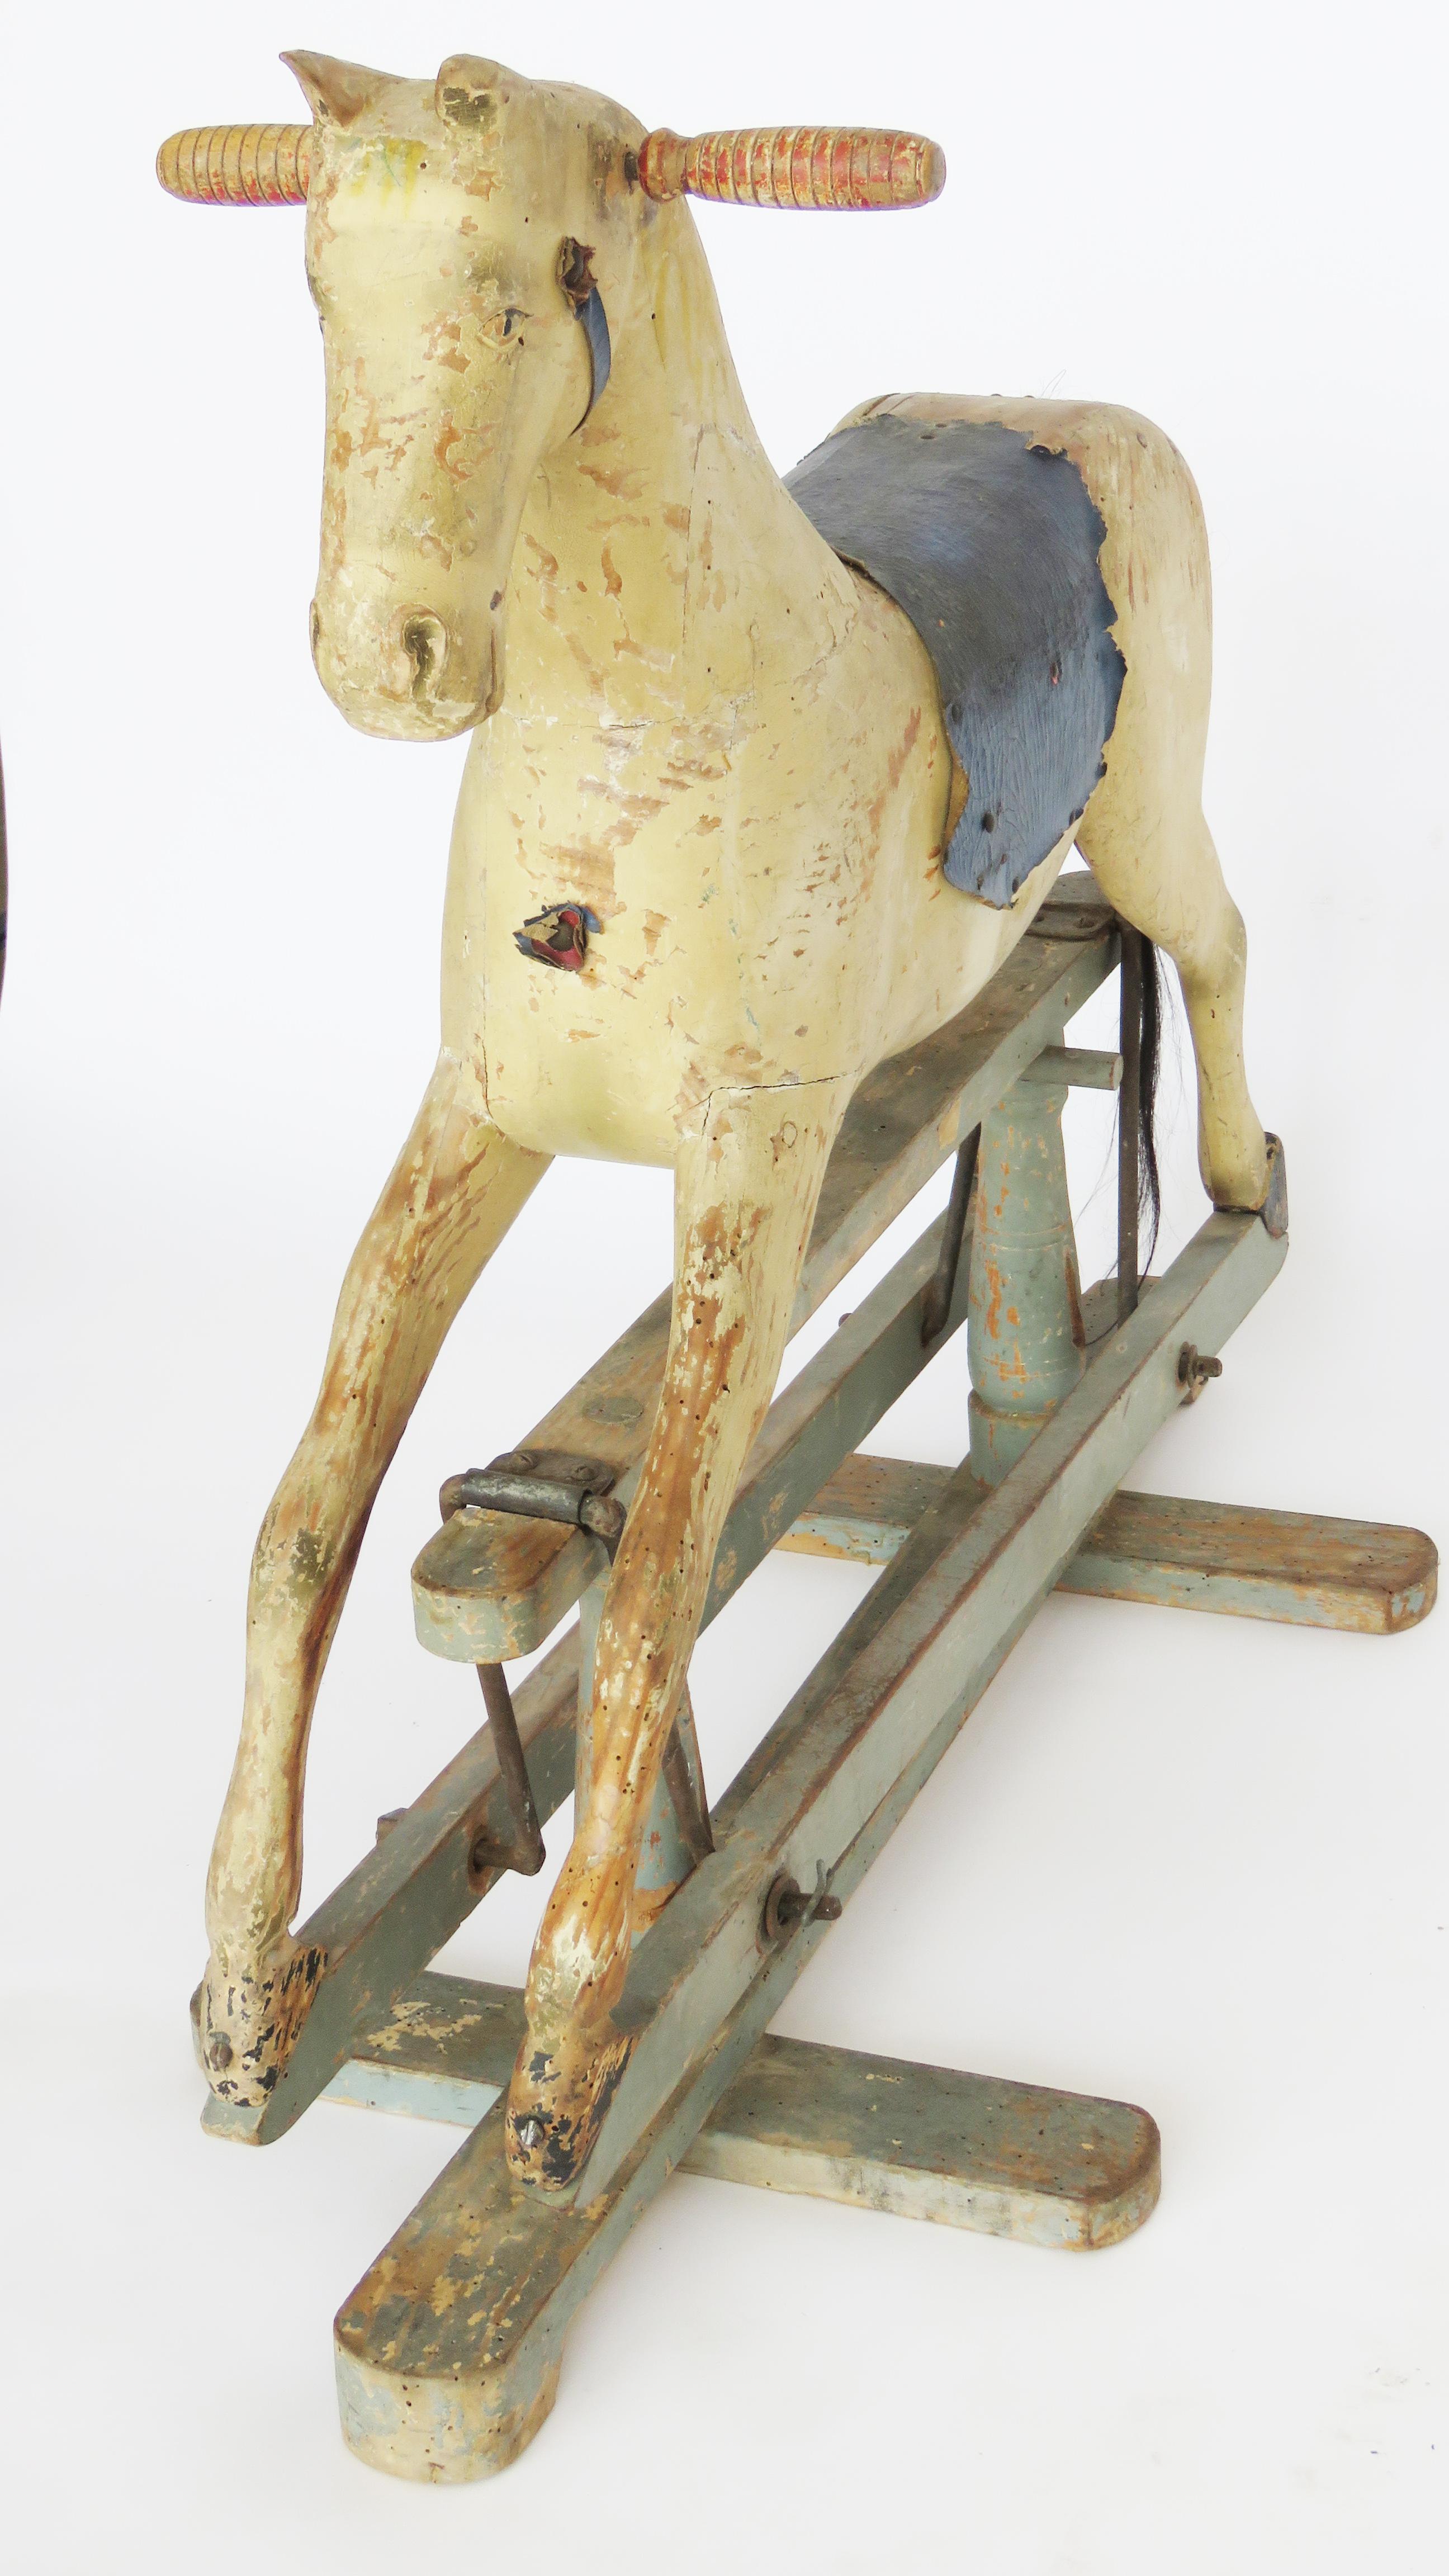 Hand-Crafted 19th Century Wooden Rocking Horse For Sale